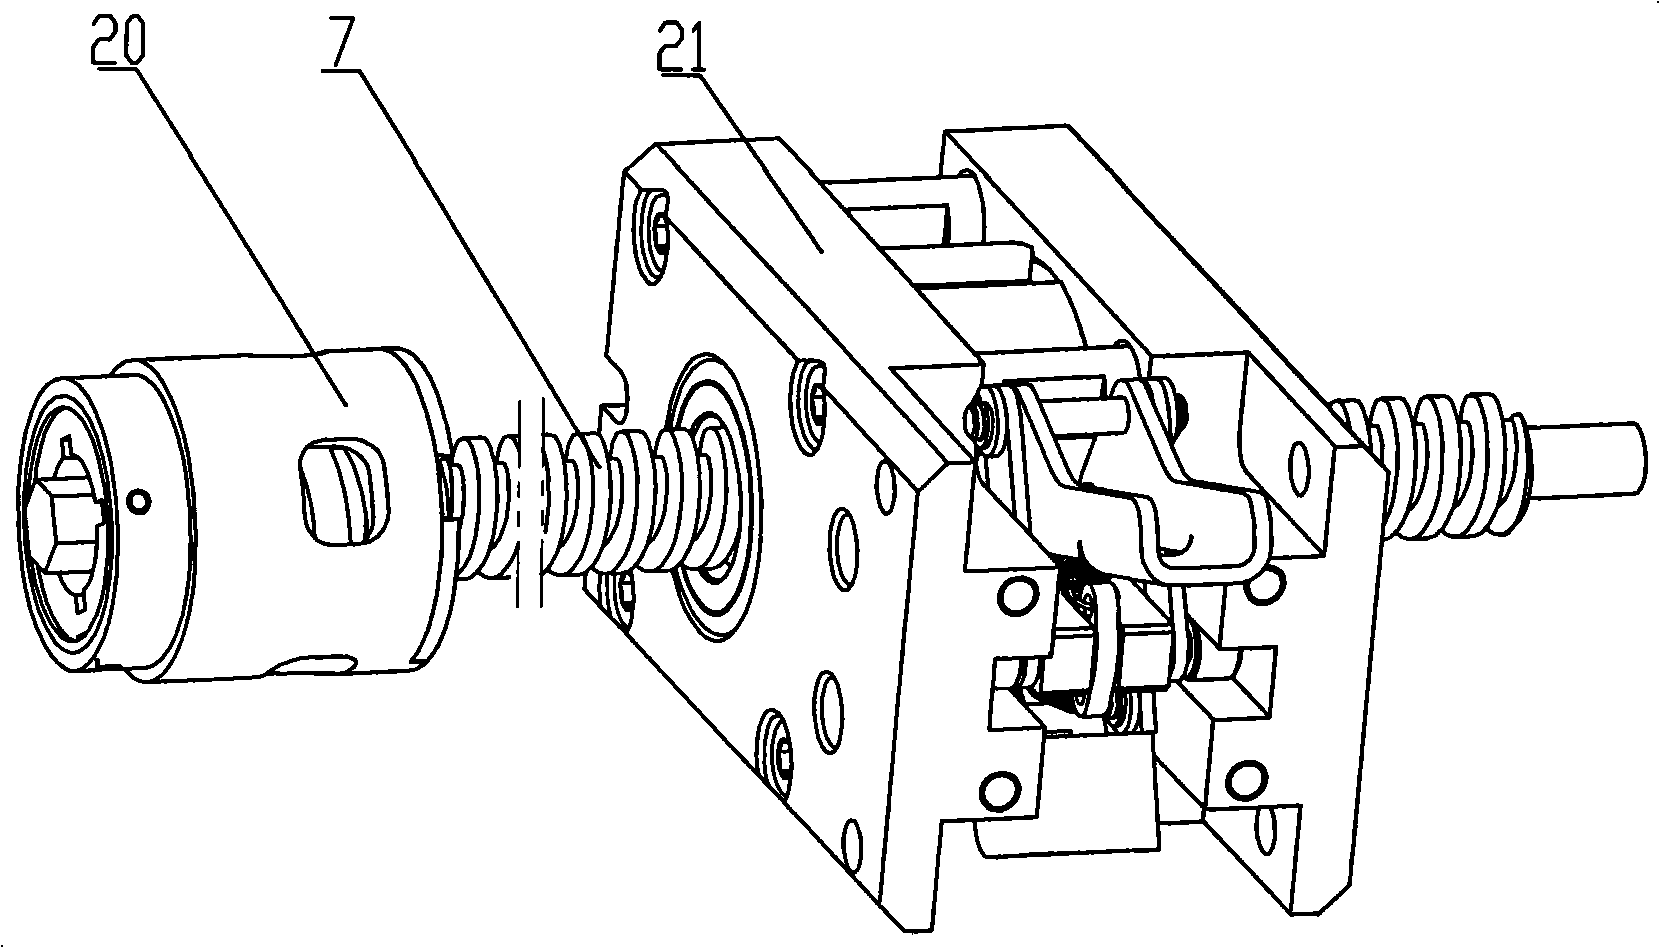 Soft interlocking mechanism for switch cabinet vehicle-in/out apparatus